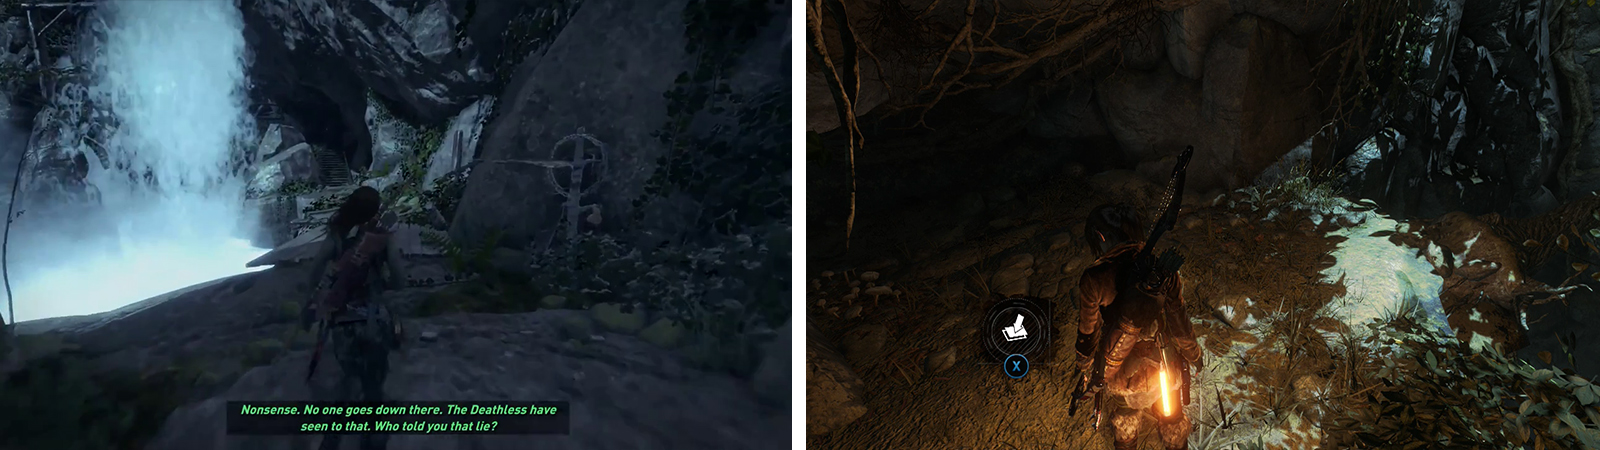 The entrance to the Challenge Tomb can be found behind the waterfall (left). Look out for Survival Cache 11 as you proceed towards the puzzle room (right).